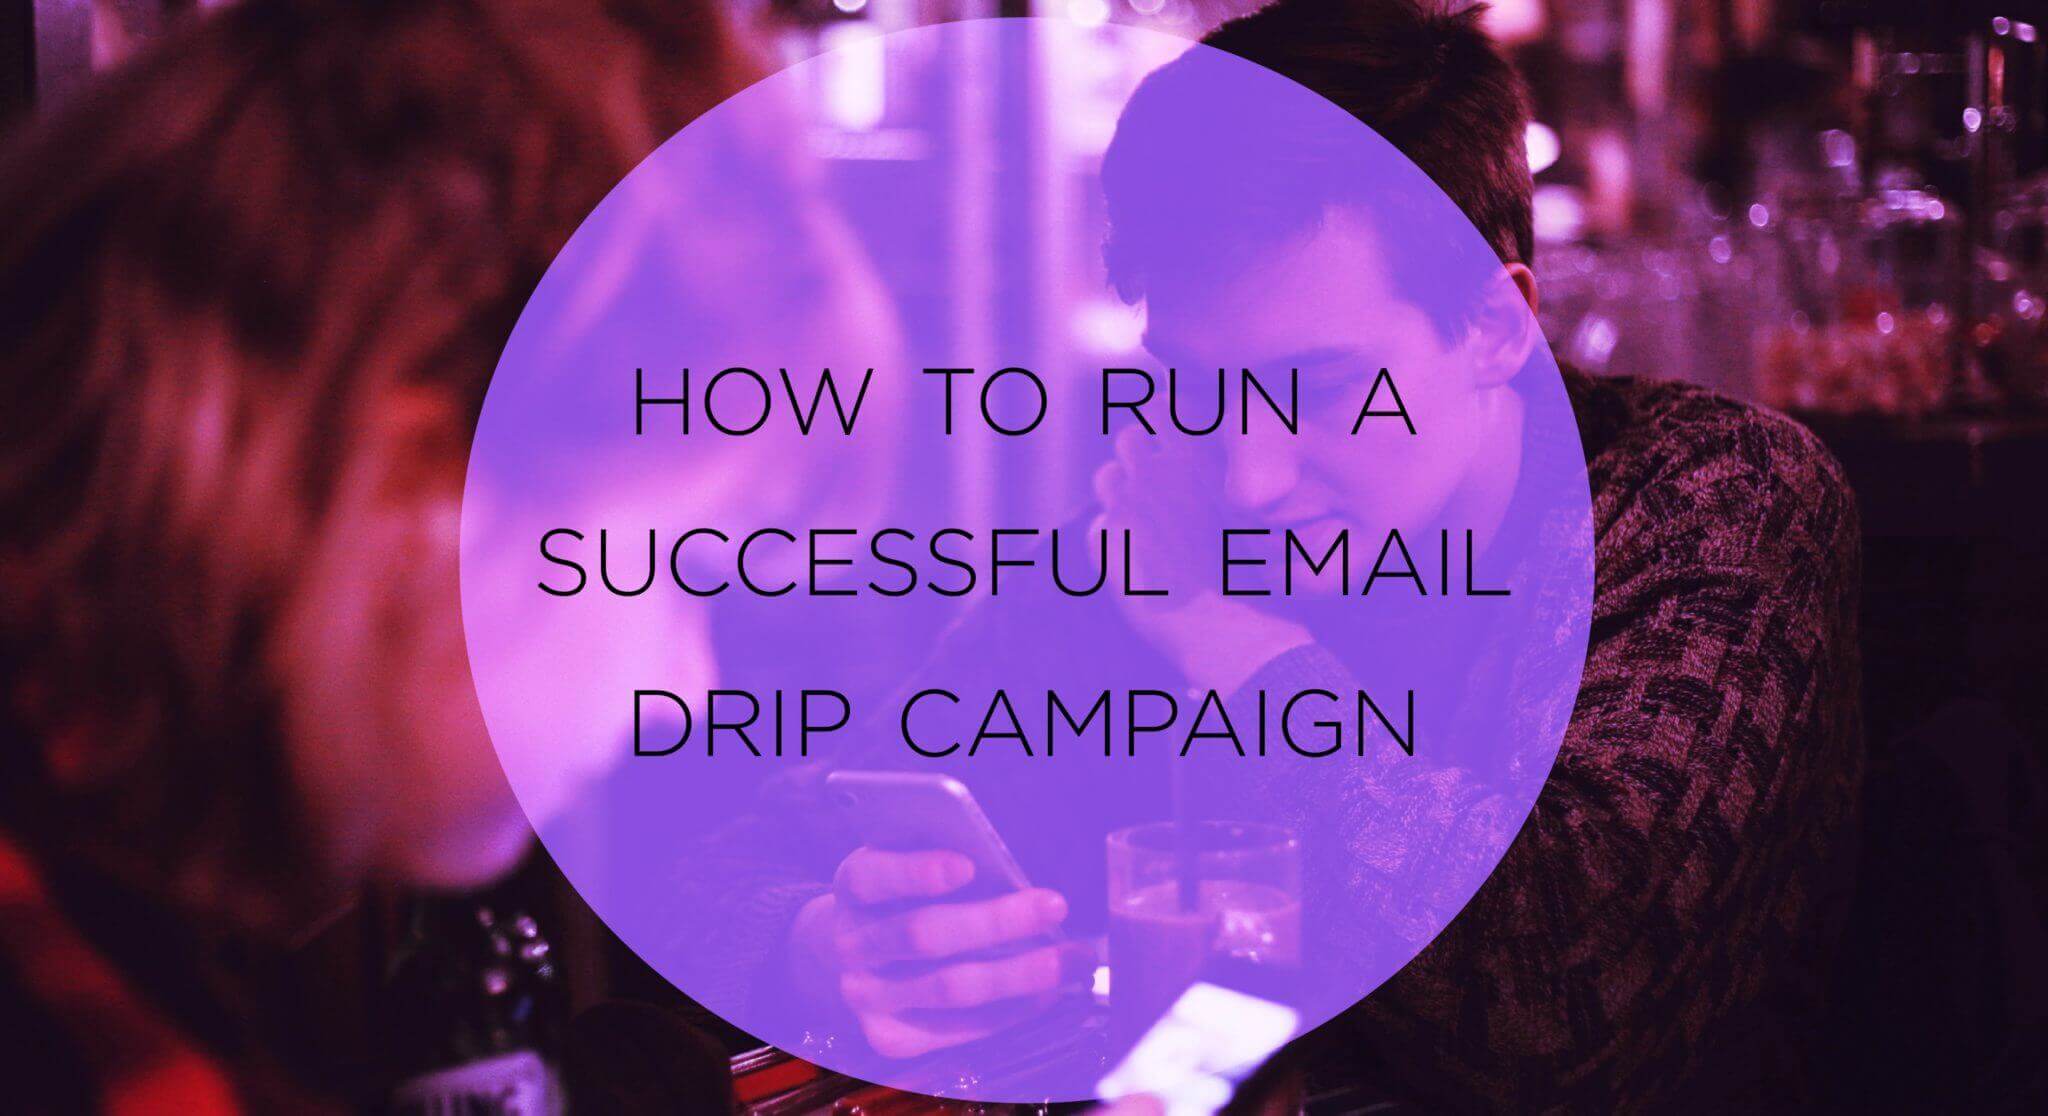 How to Run a Successful Email Drip Campaign